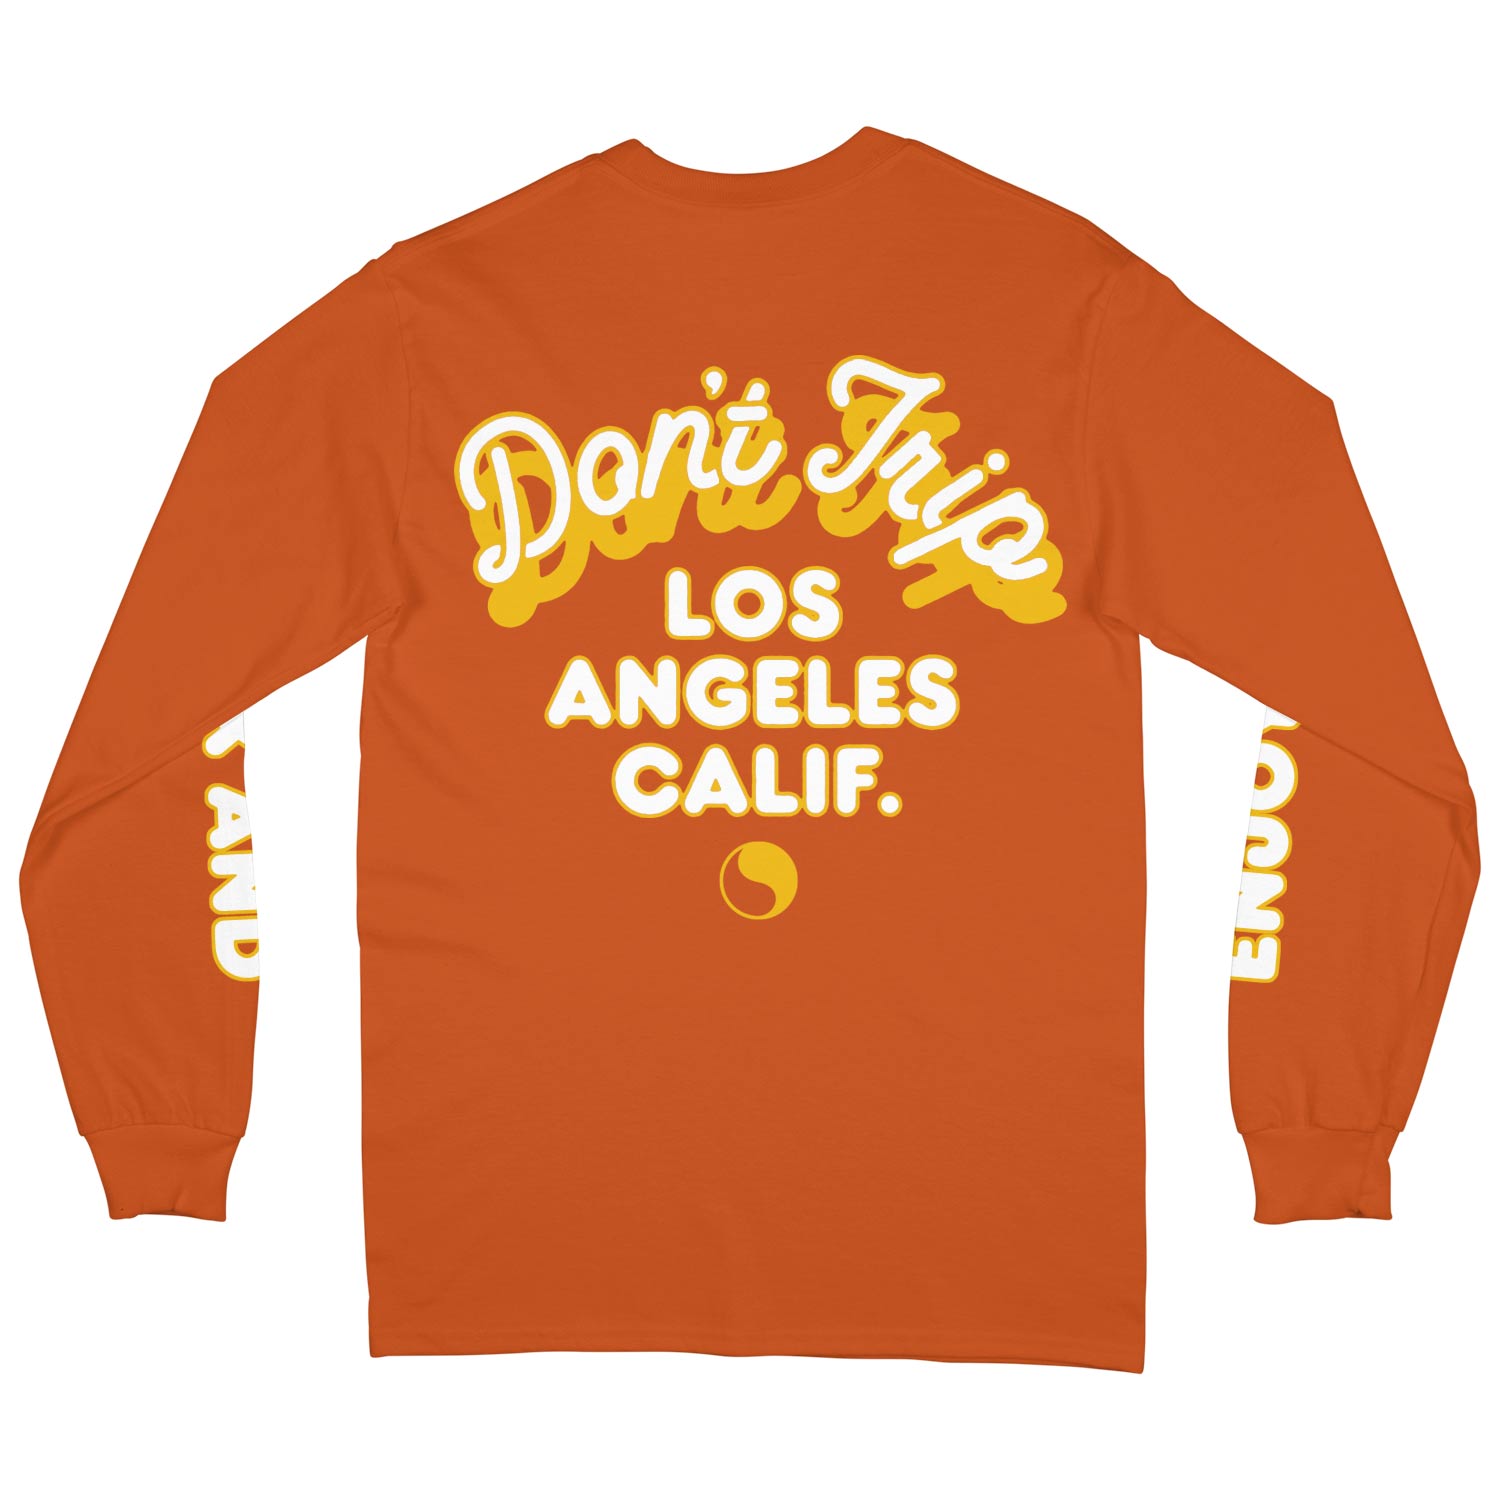 Neon Long Sleeve Tee in orange with a white and gold design on a white background - Free & Easy